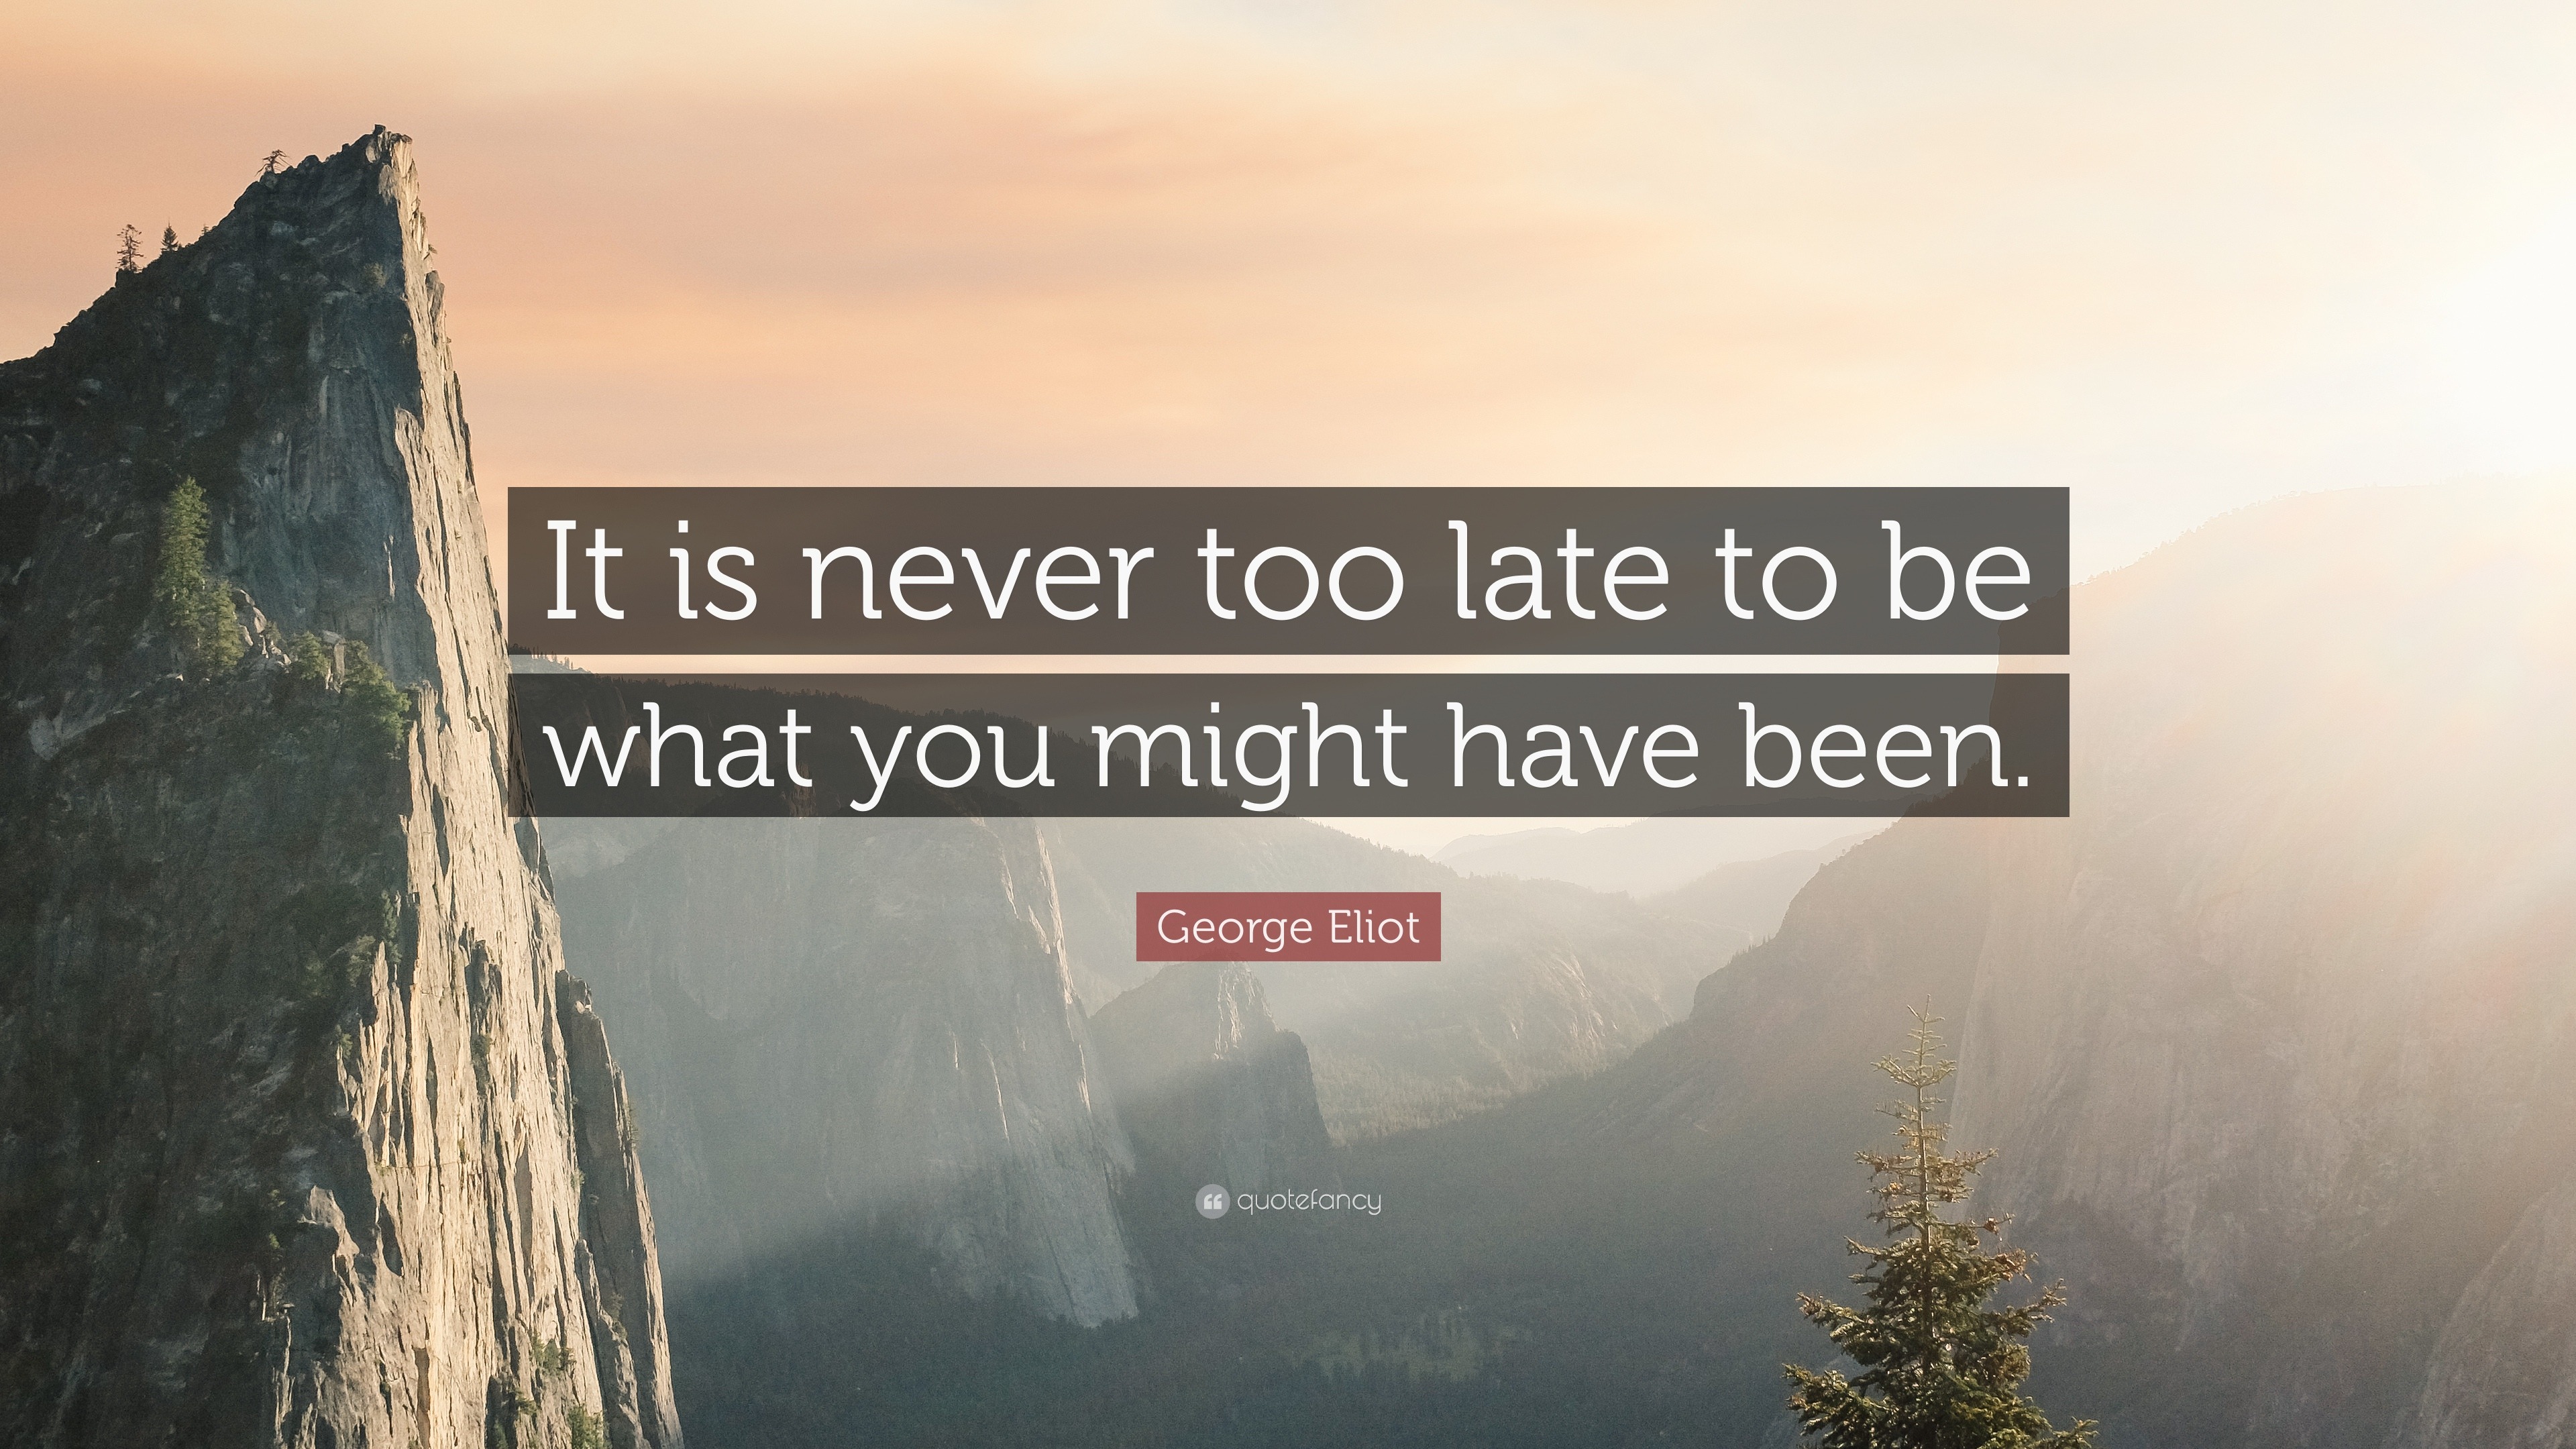 George Eliot Quote: “It is never too late to be what you might have